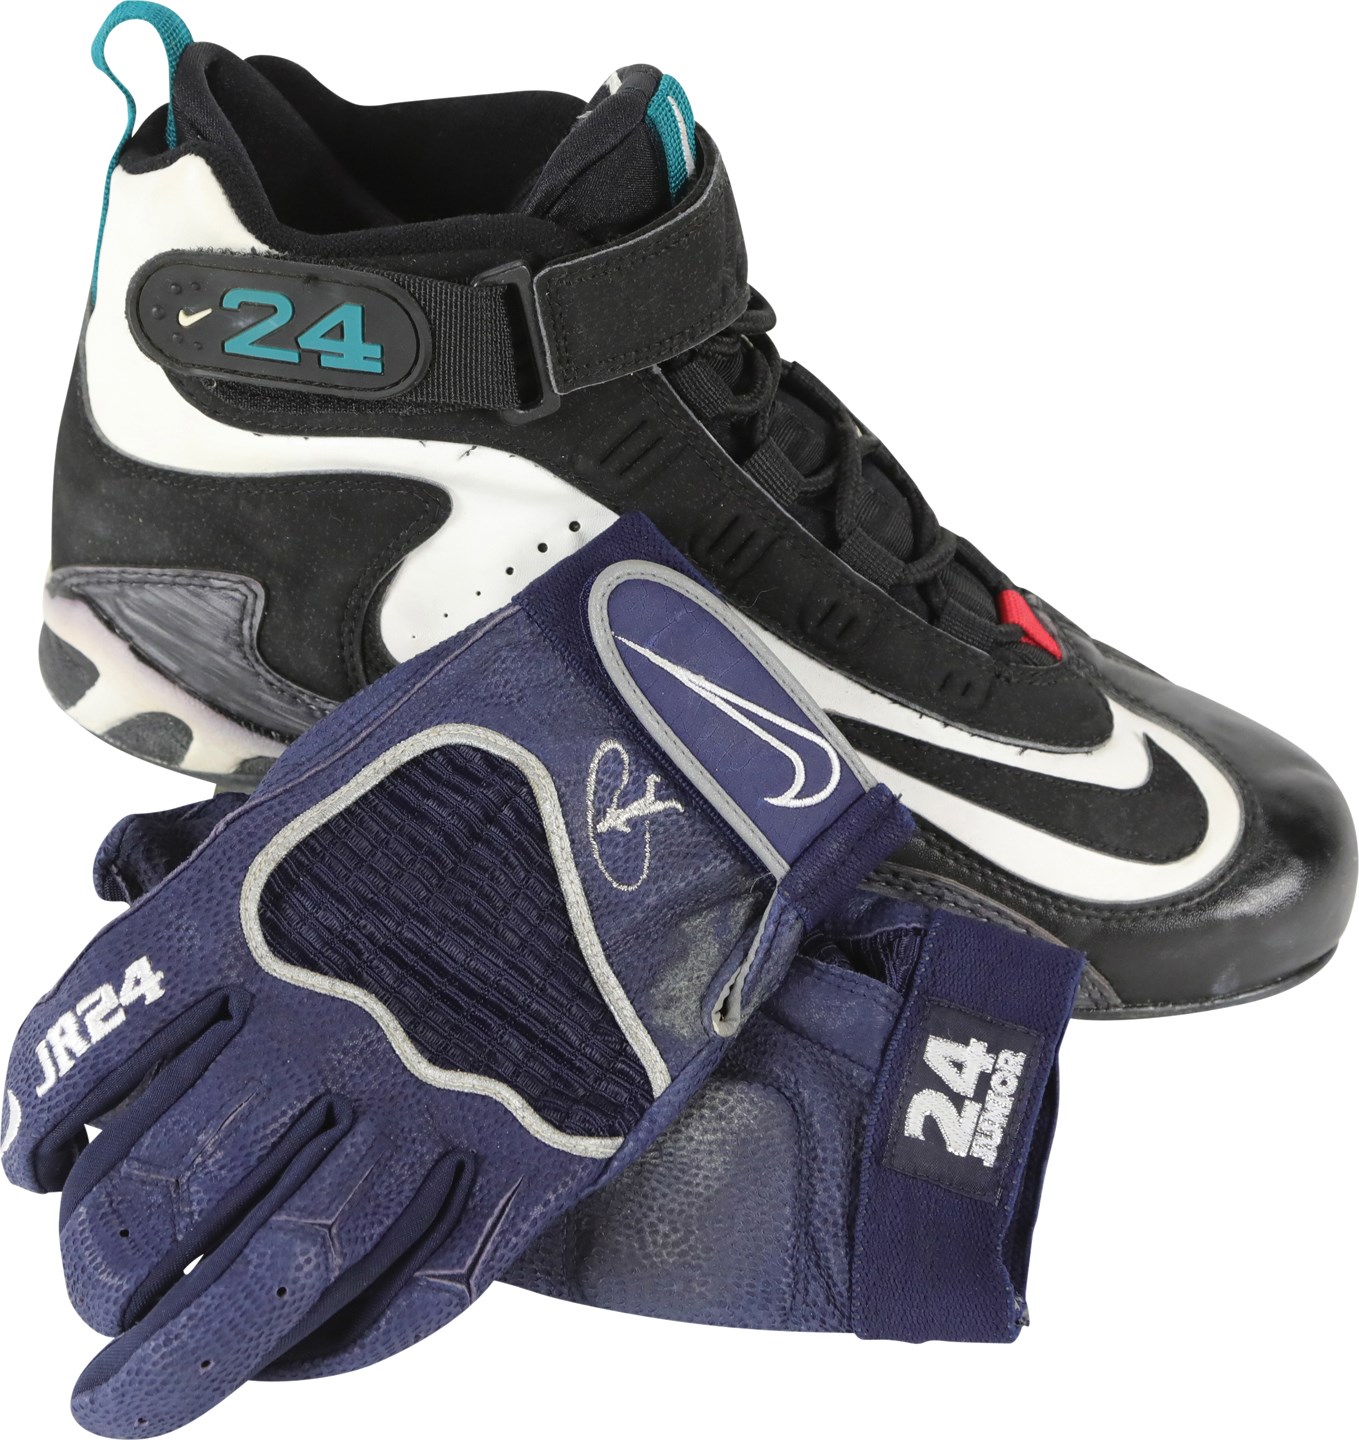 Baseball Equipment - 1999 Ken Griffey Jr. Seattle Mariners Game Used Batting Gloves and Cleat